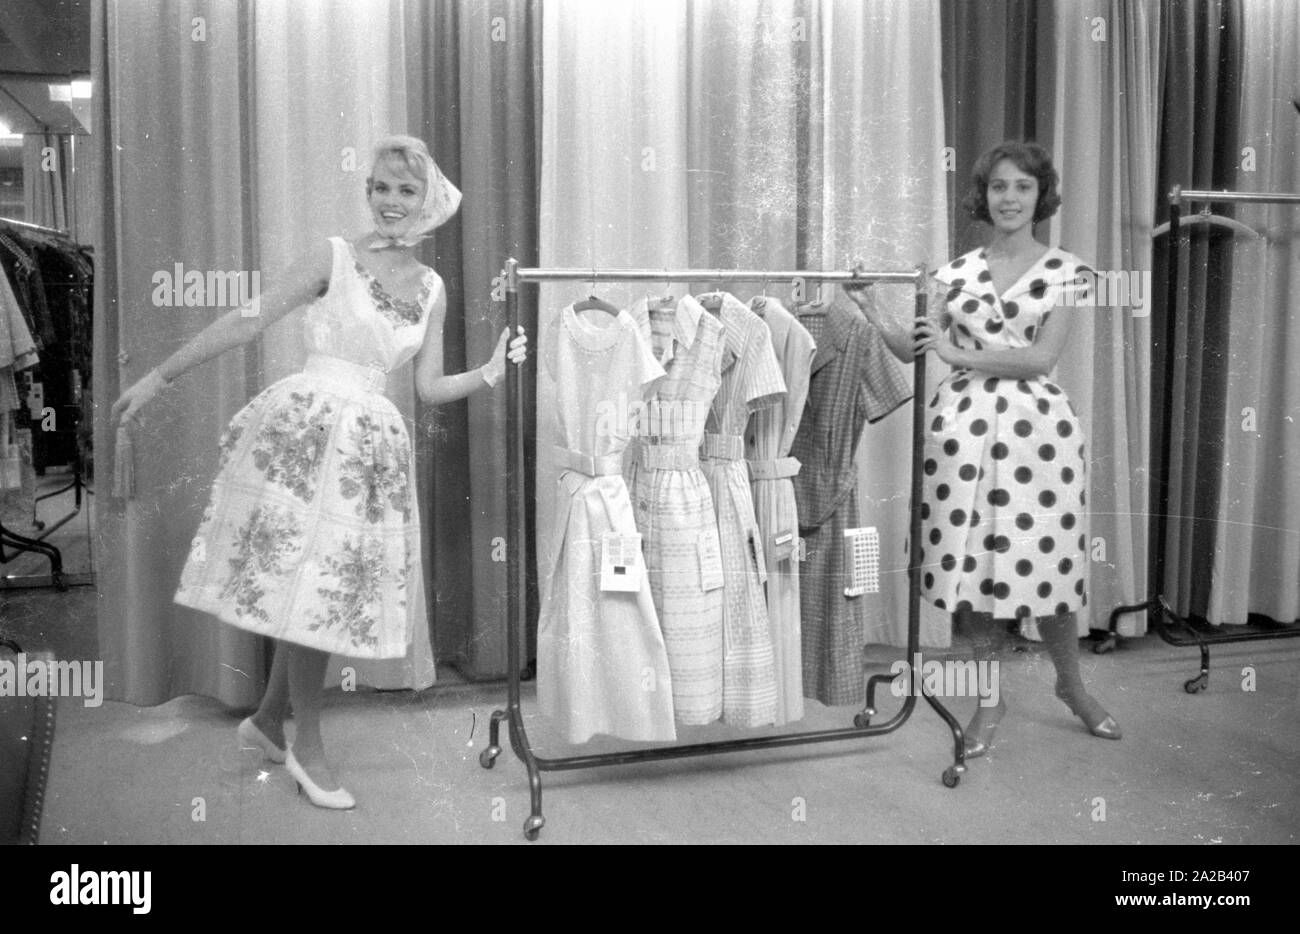 Two models present new clothes from a designer. The picture was taken at one of the presentations of the 'Berliner Durchreise', the oldest fashion fair in the world. This trade fair is held every six months at various locations in Berlin for trade professionals and buyers. Stock Photo